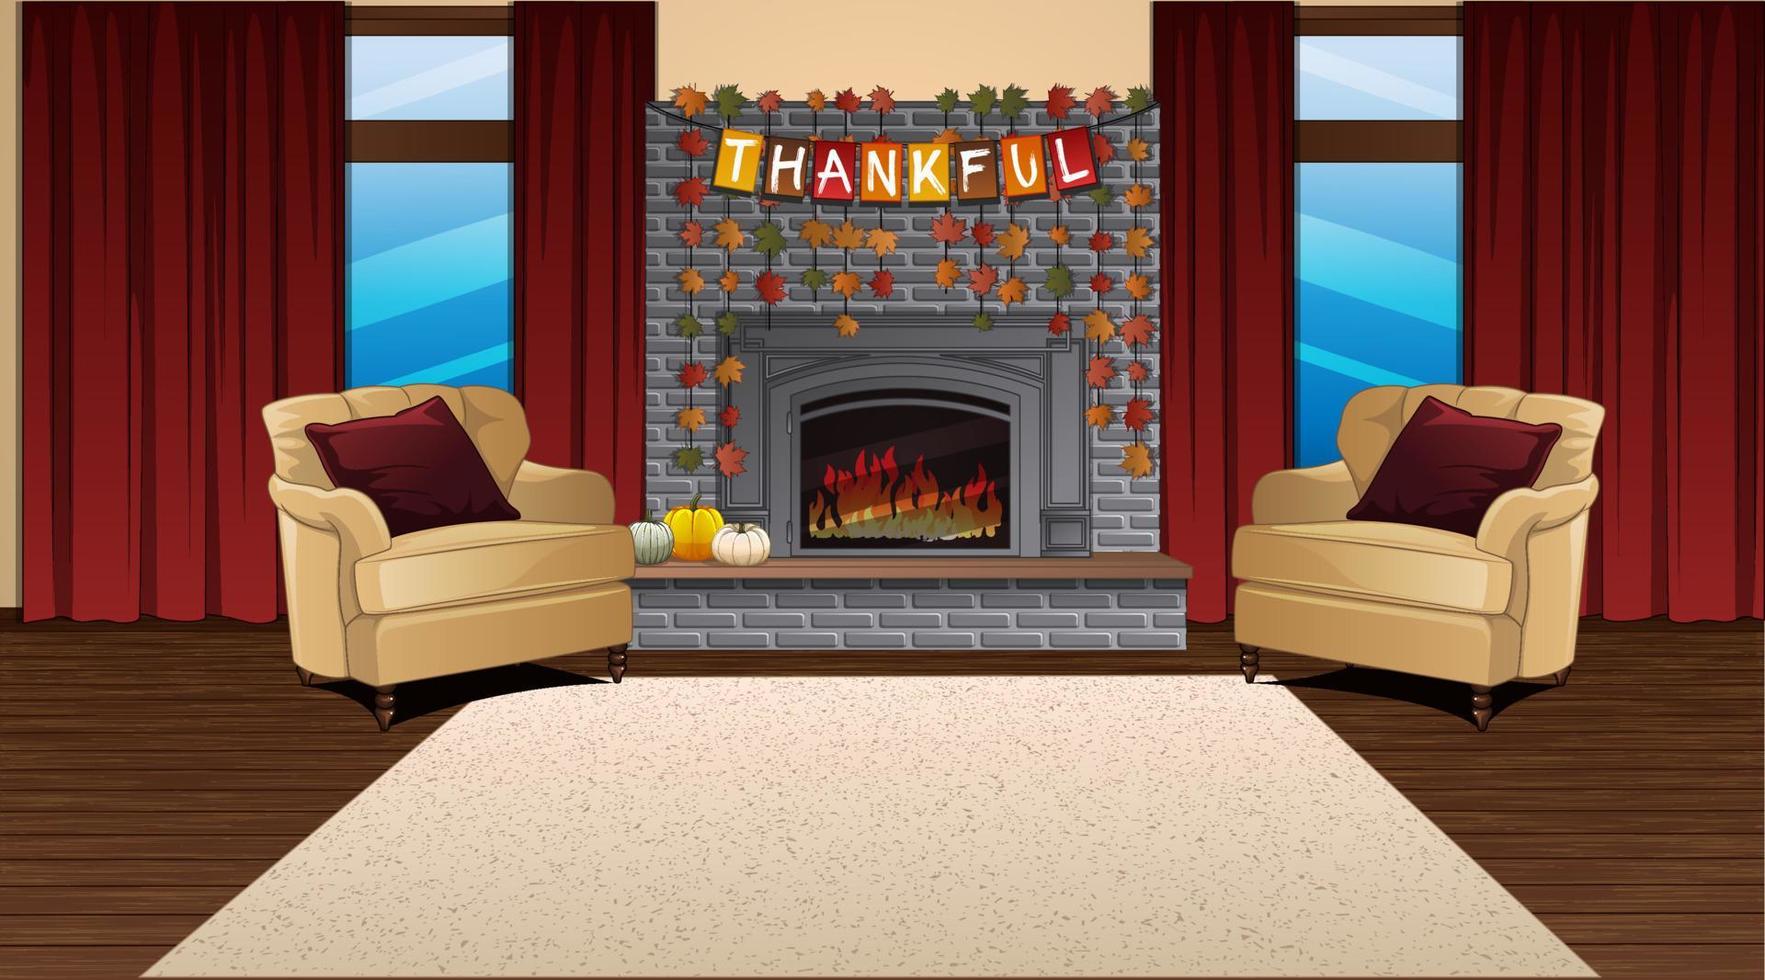 Thanksgiving Theme Background Scene with Living Room Fireplace, Windows, Armchairs and Fall Decorations. Vector Illustration